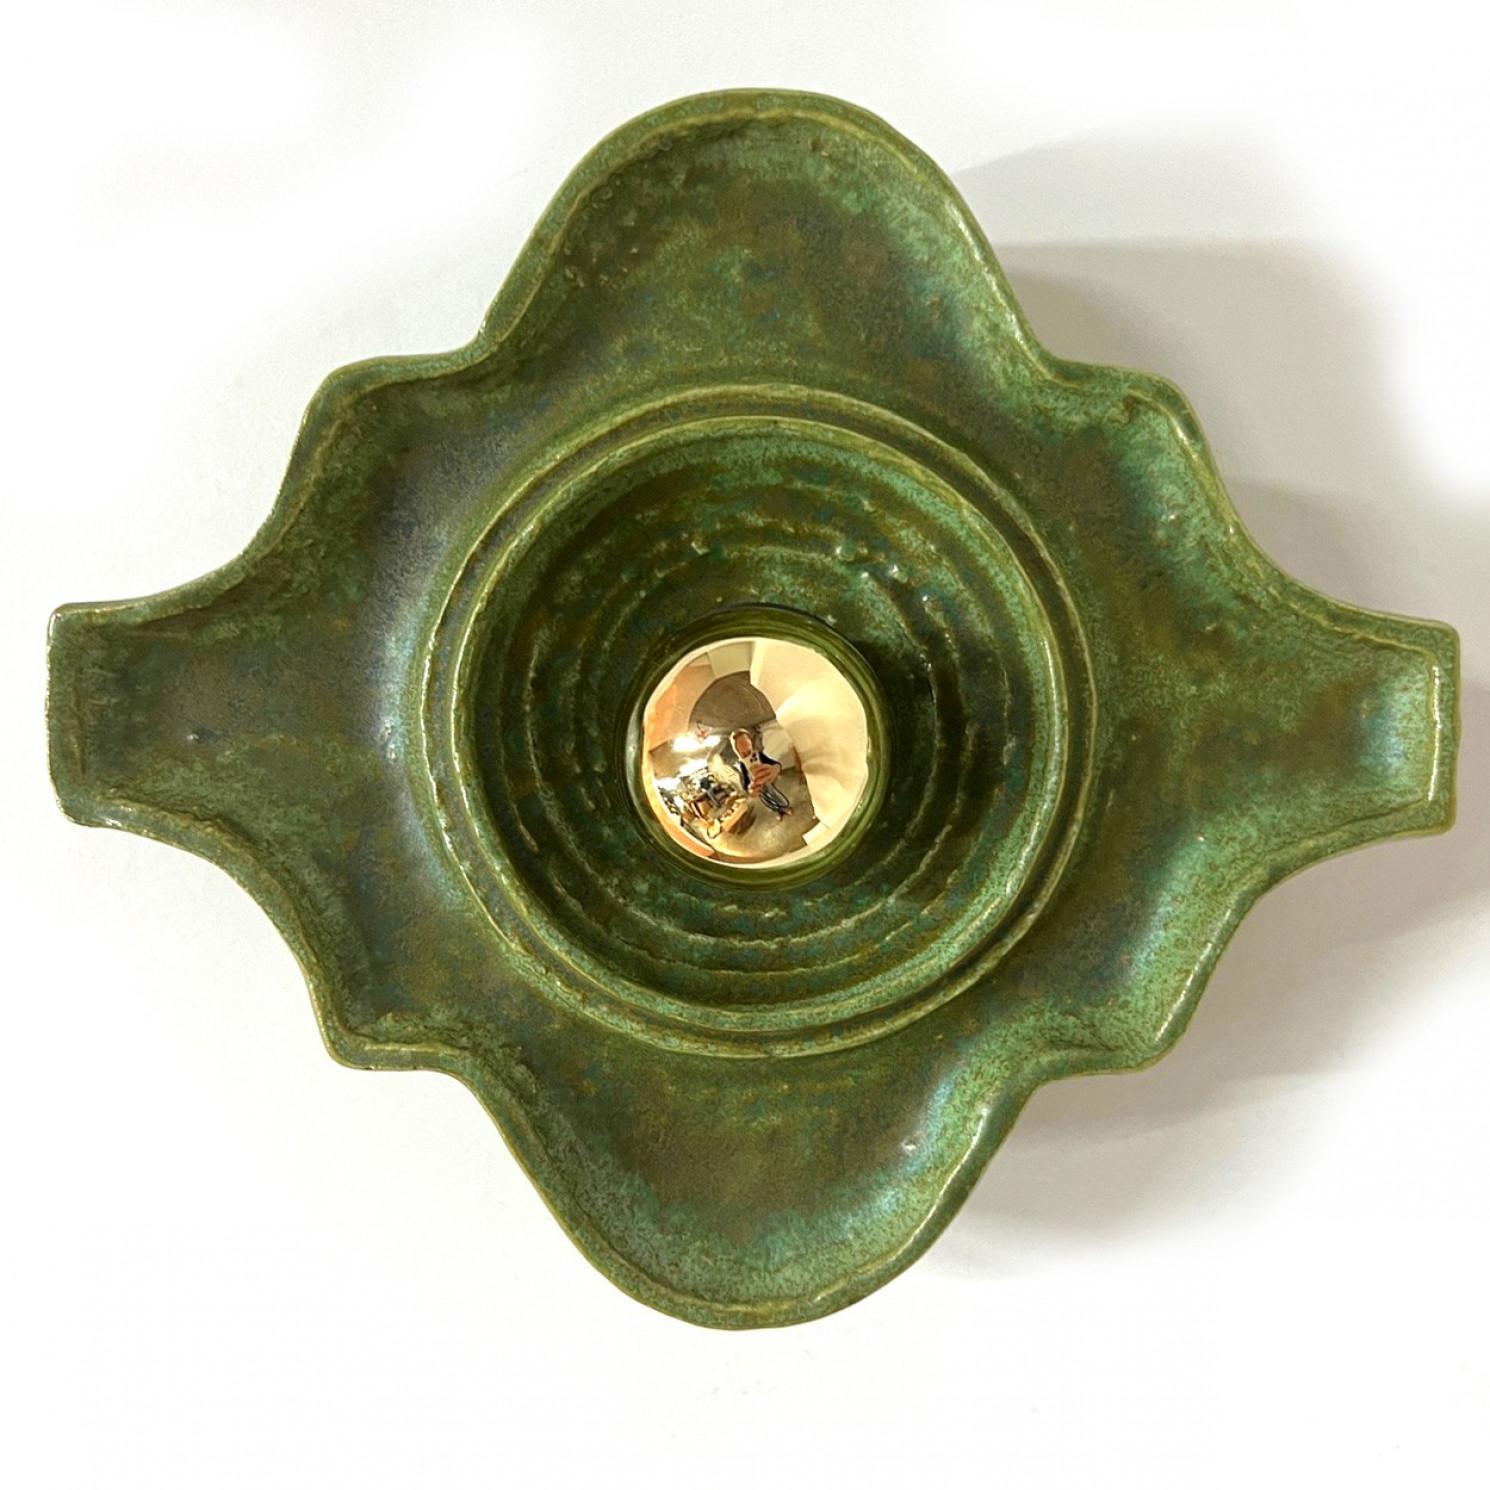 1 of the 4 Green ceramic wall lights in Fat Lava style. Manufactured in Germany in the 1970s.

The style of the glaze is called 'Fat Lava'. Which means the glaze is thick on some parts, like lava.
A typical way to finish ceramic in mid-century